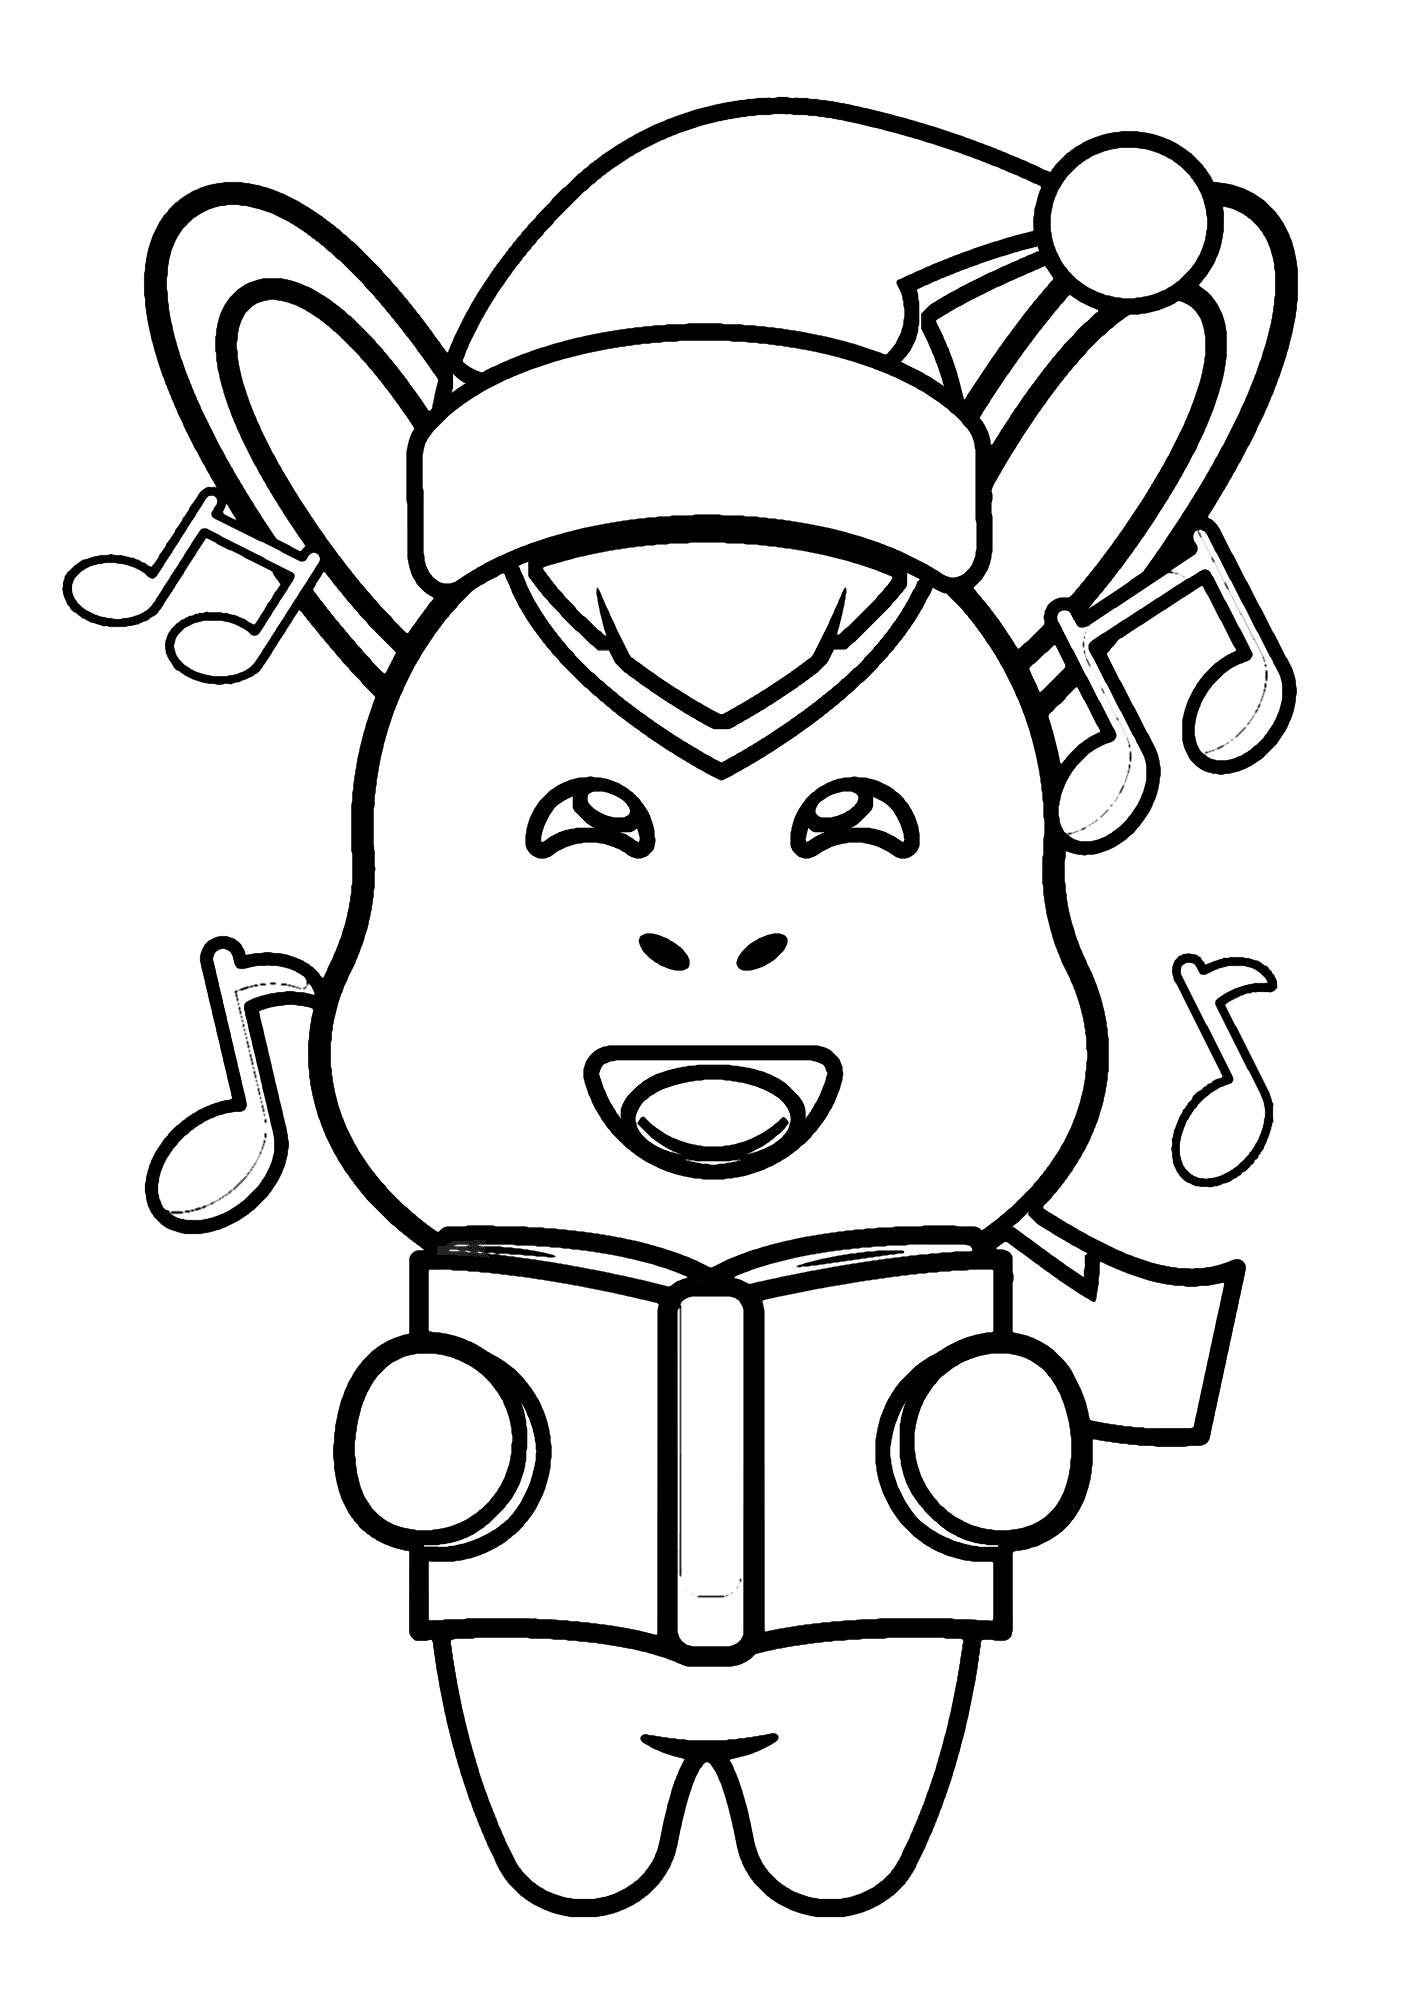 Donkey Christmas Coloring Page